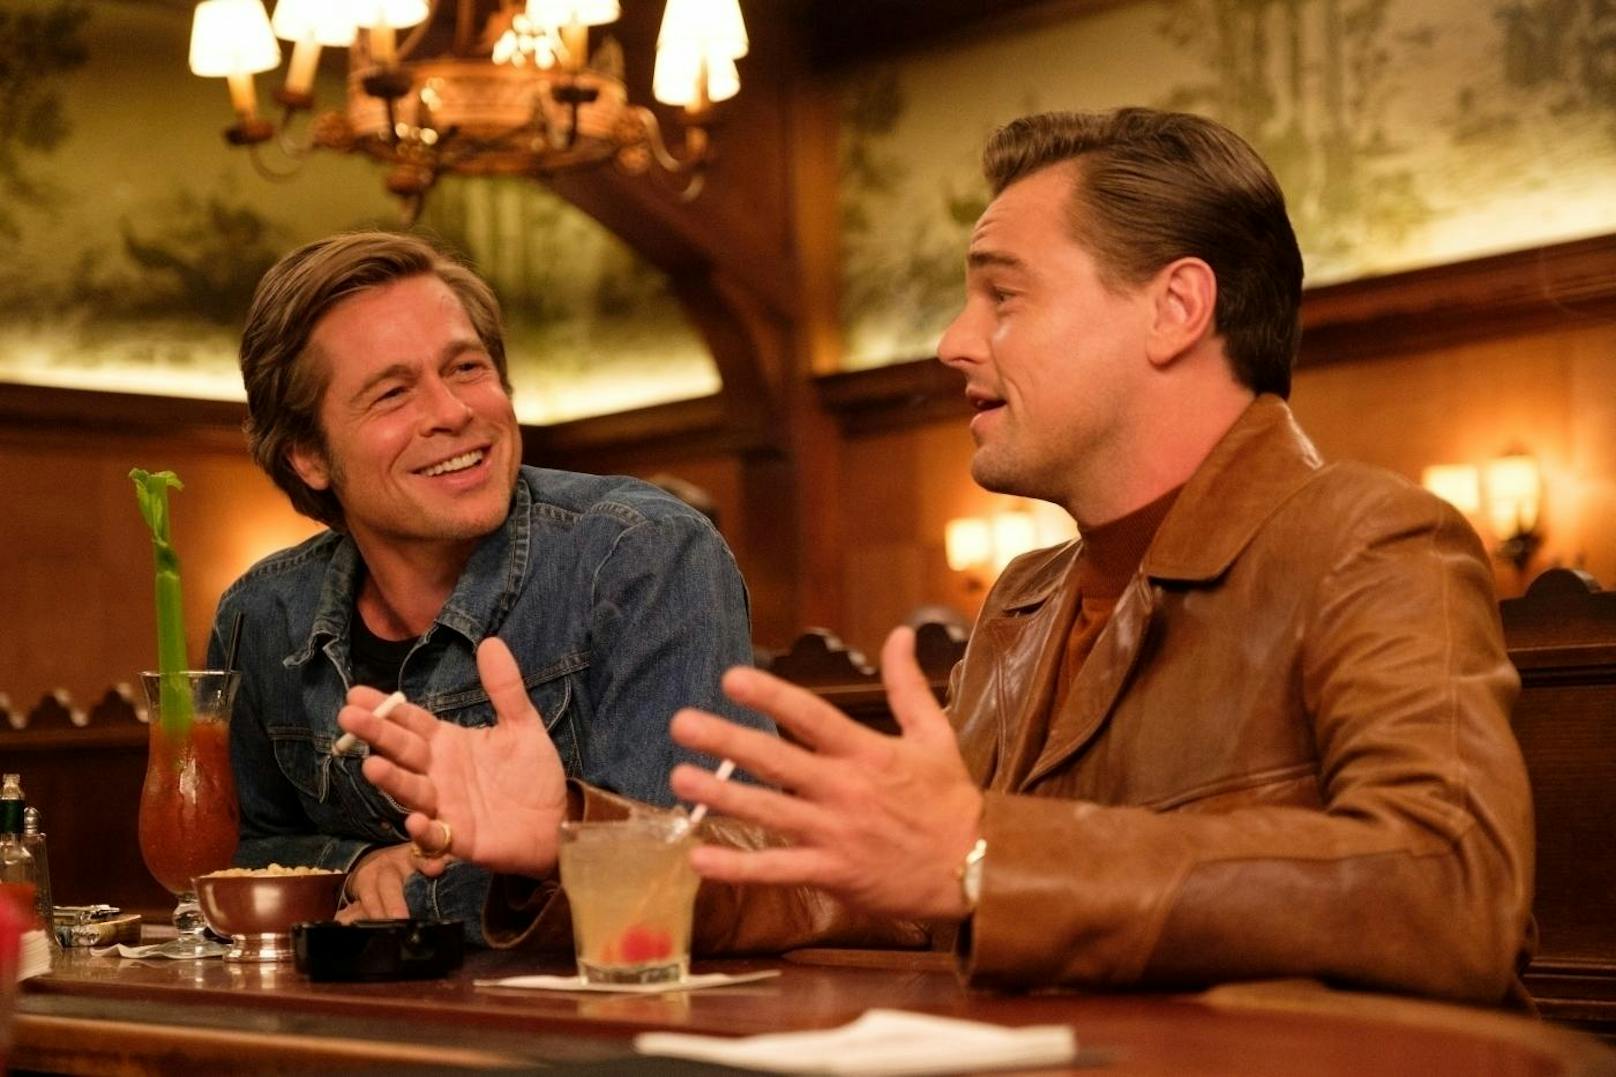 Brad Pitt in "Once Upon a Time ... in Hollywood"